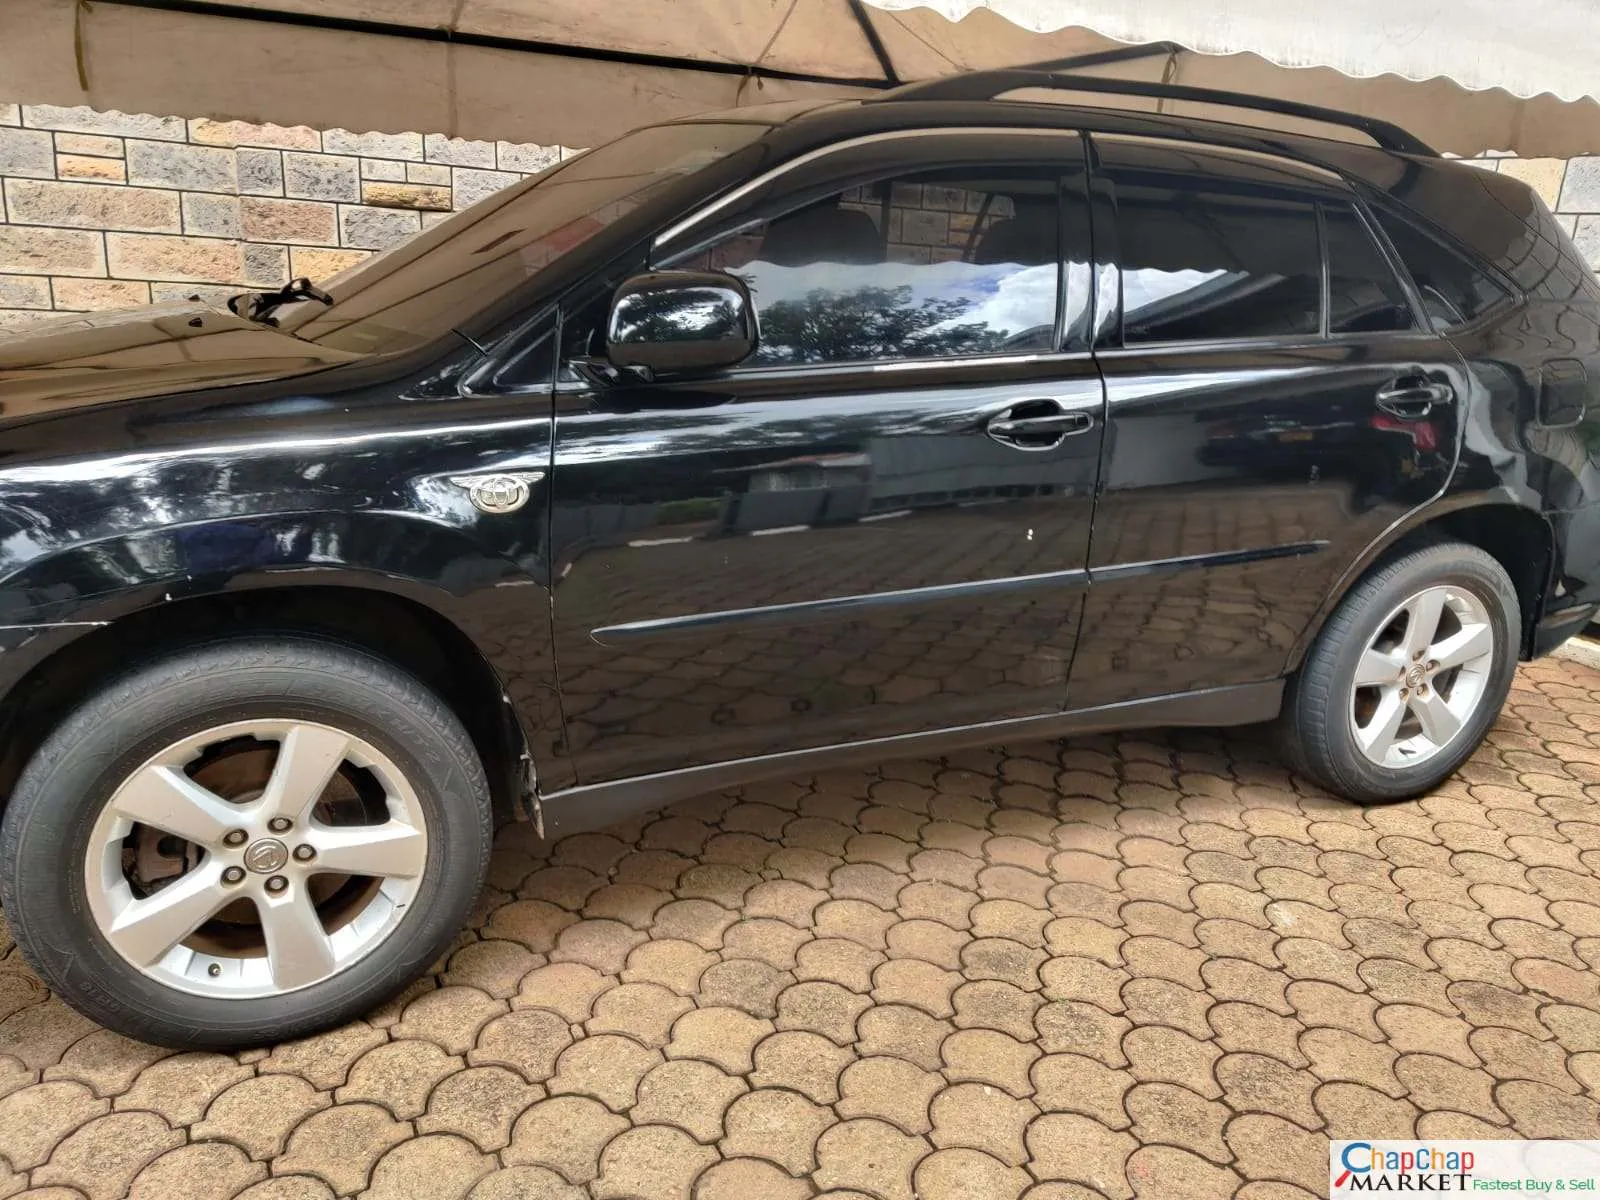 Cars Cars For Sale/Vehicles-LEXUS RX 300 for sale in Kenya 550K You Pay 30% Deposit Trade in OK EXCLUSIVE 7